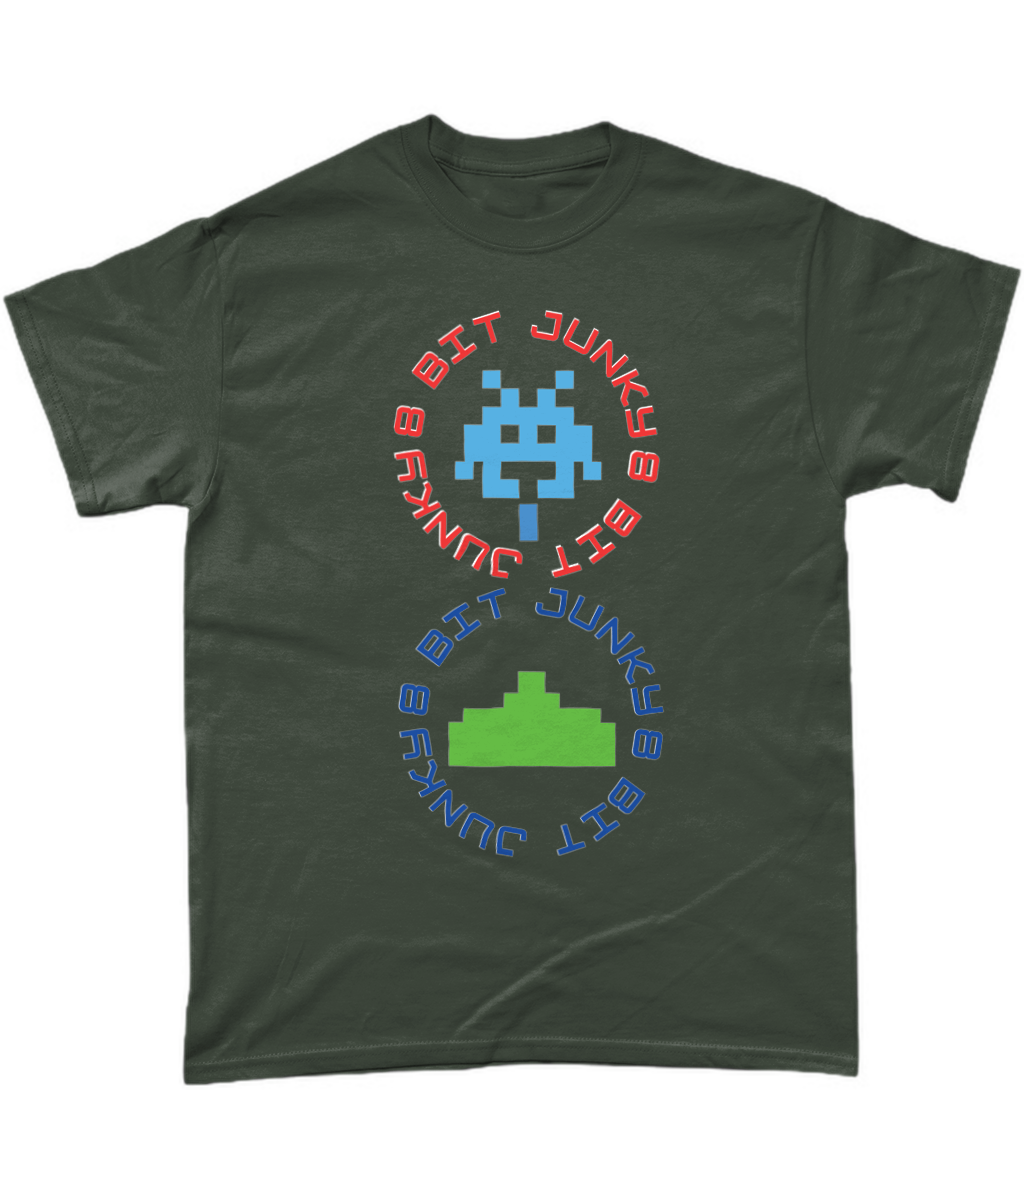 Green T-Shirt with words 8-bit junky in 2 circles making a figure 8 with an invader in one circle and earth ship in the other